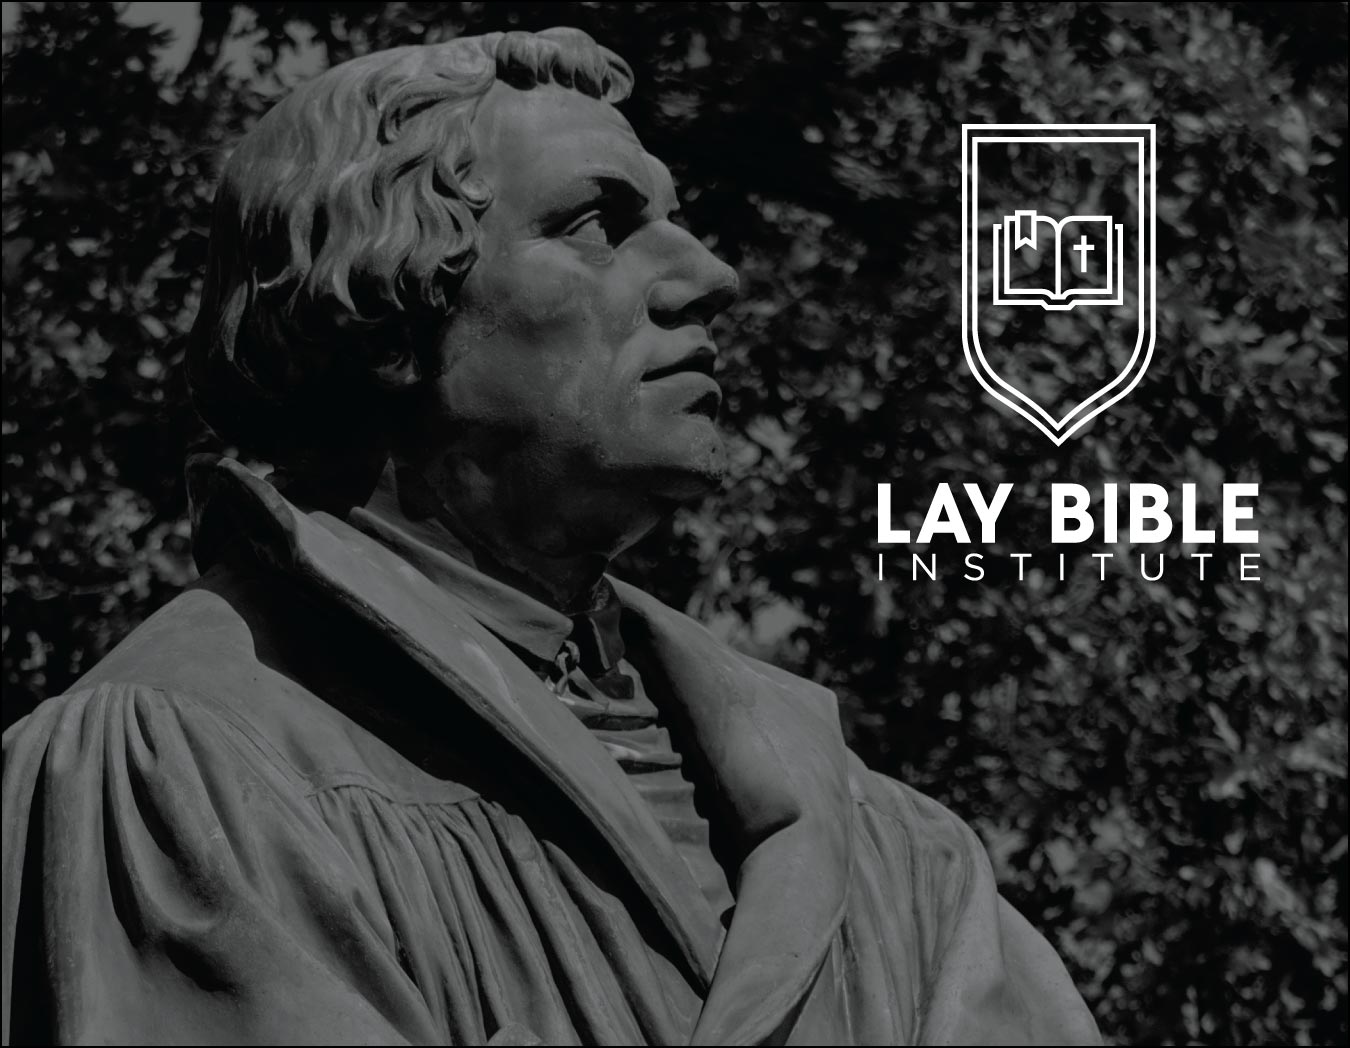 Lay Bible Institute